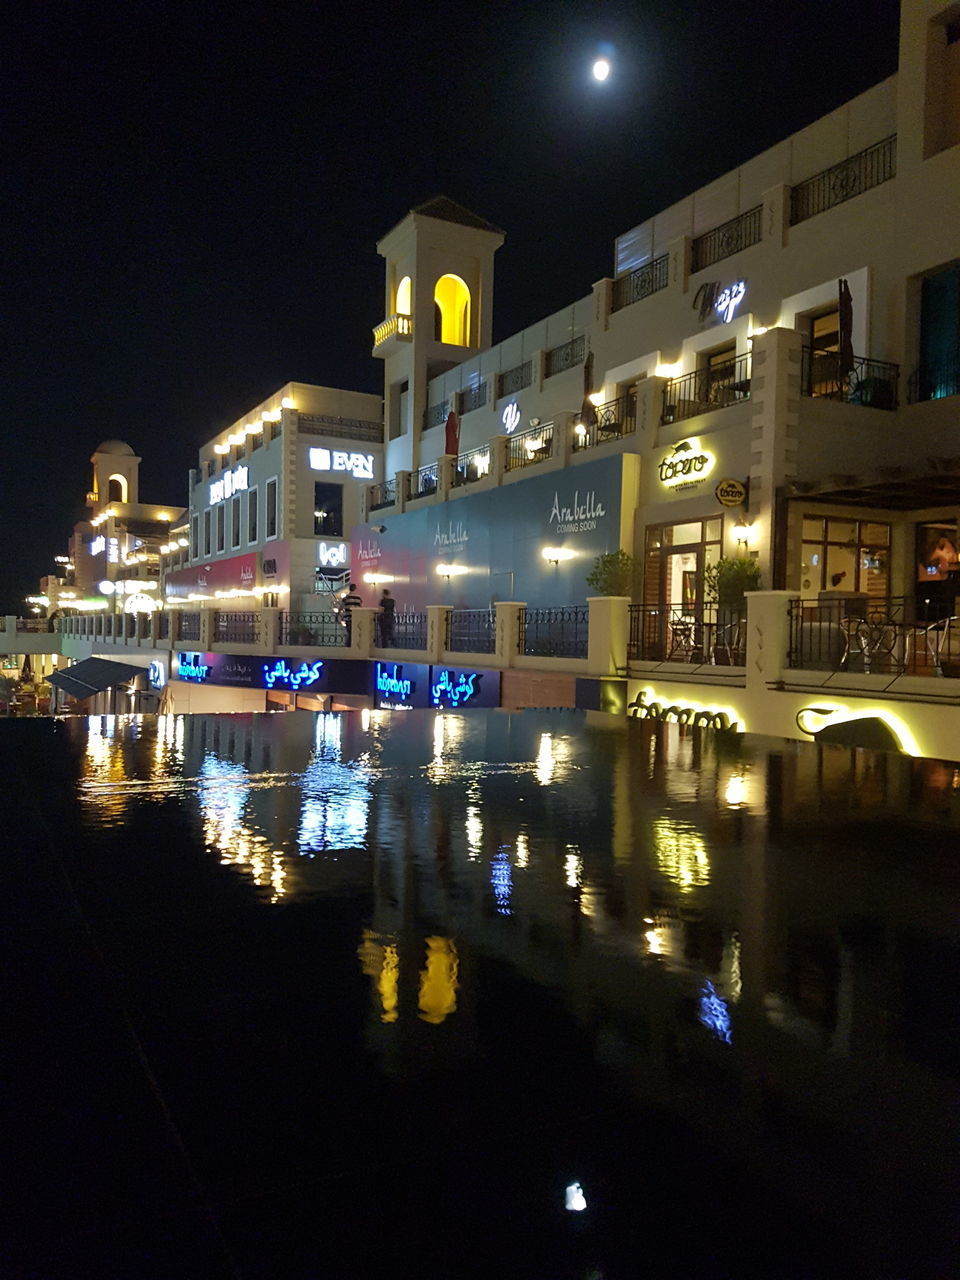 REFLECTION OF ILLUMINATED BUILDINGS IN WATER